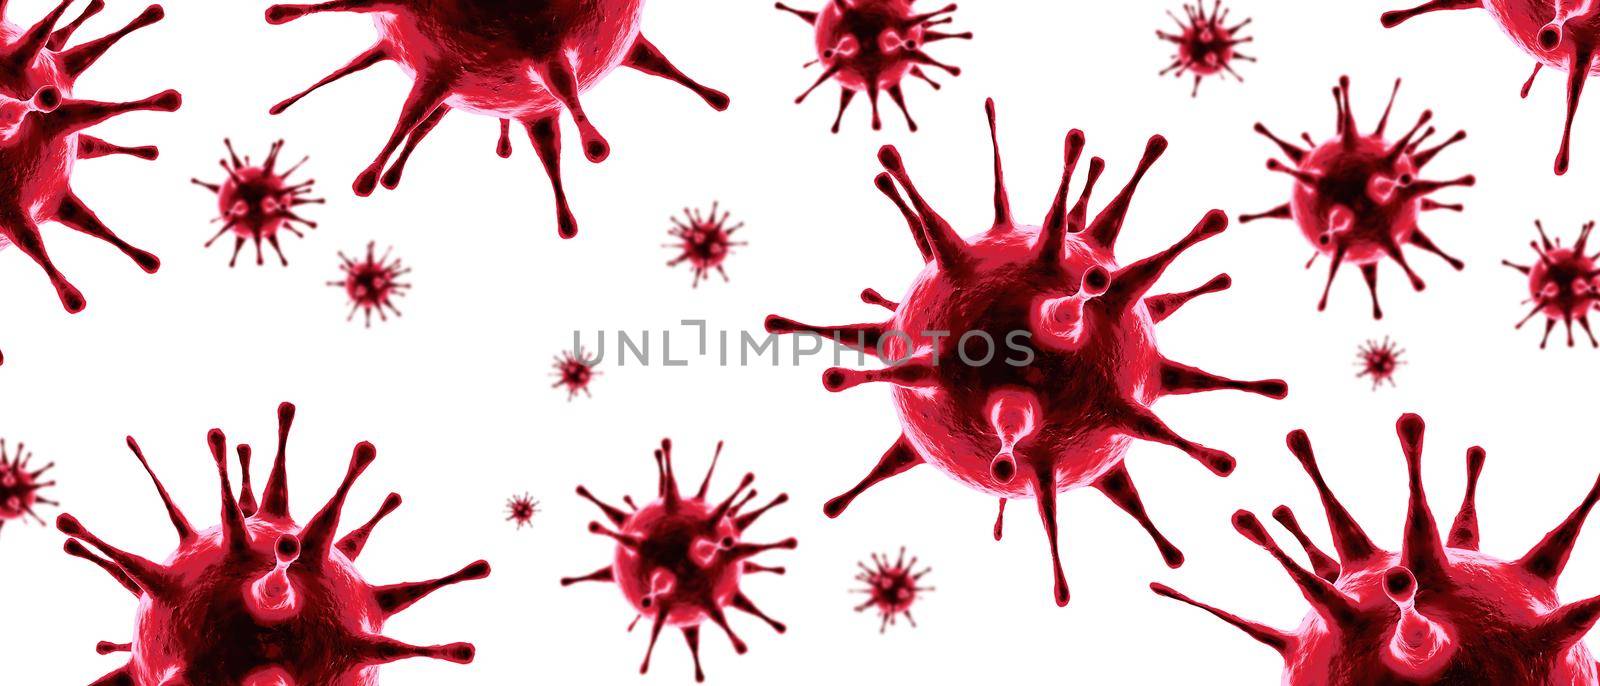 New covid-19 conoravirus outbreak. 3D illustration by Taut